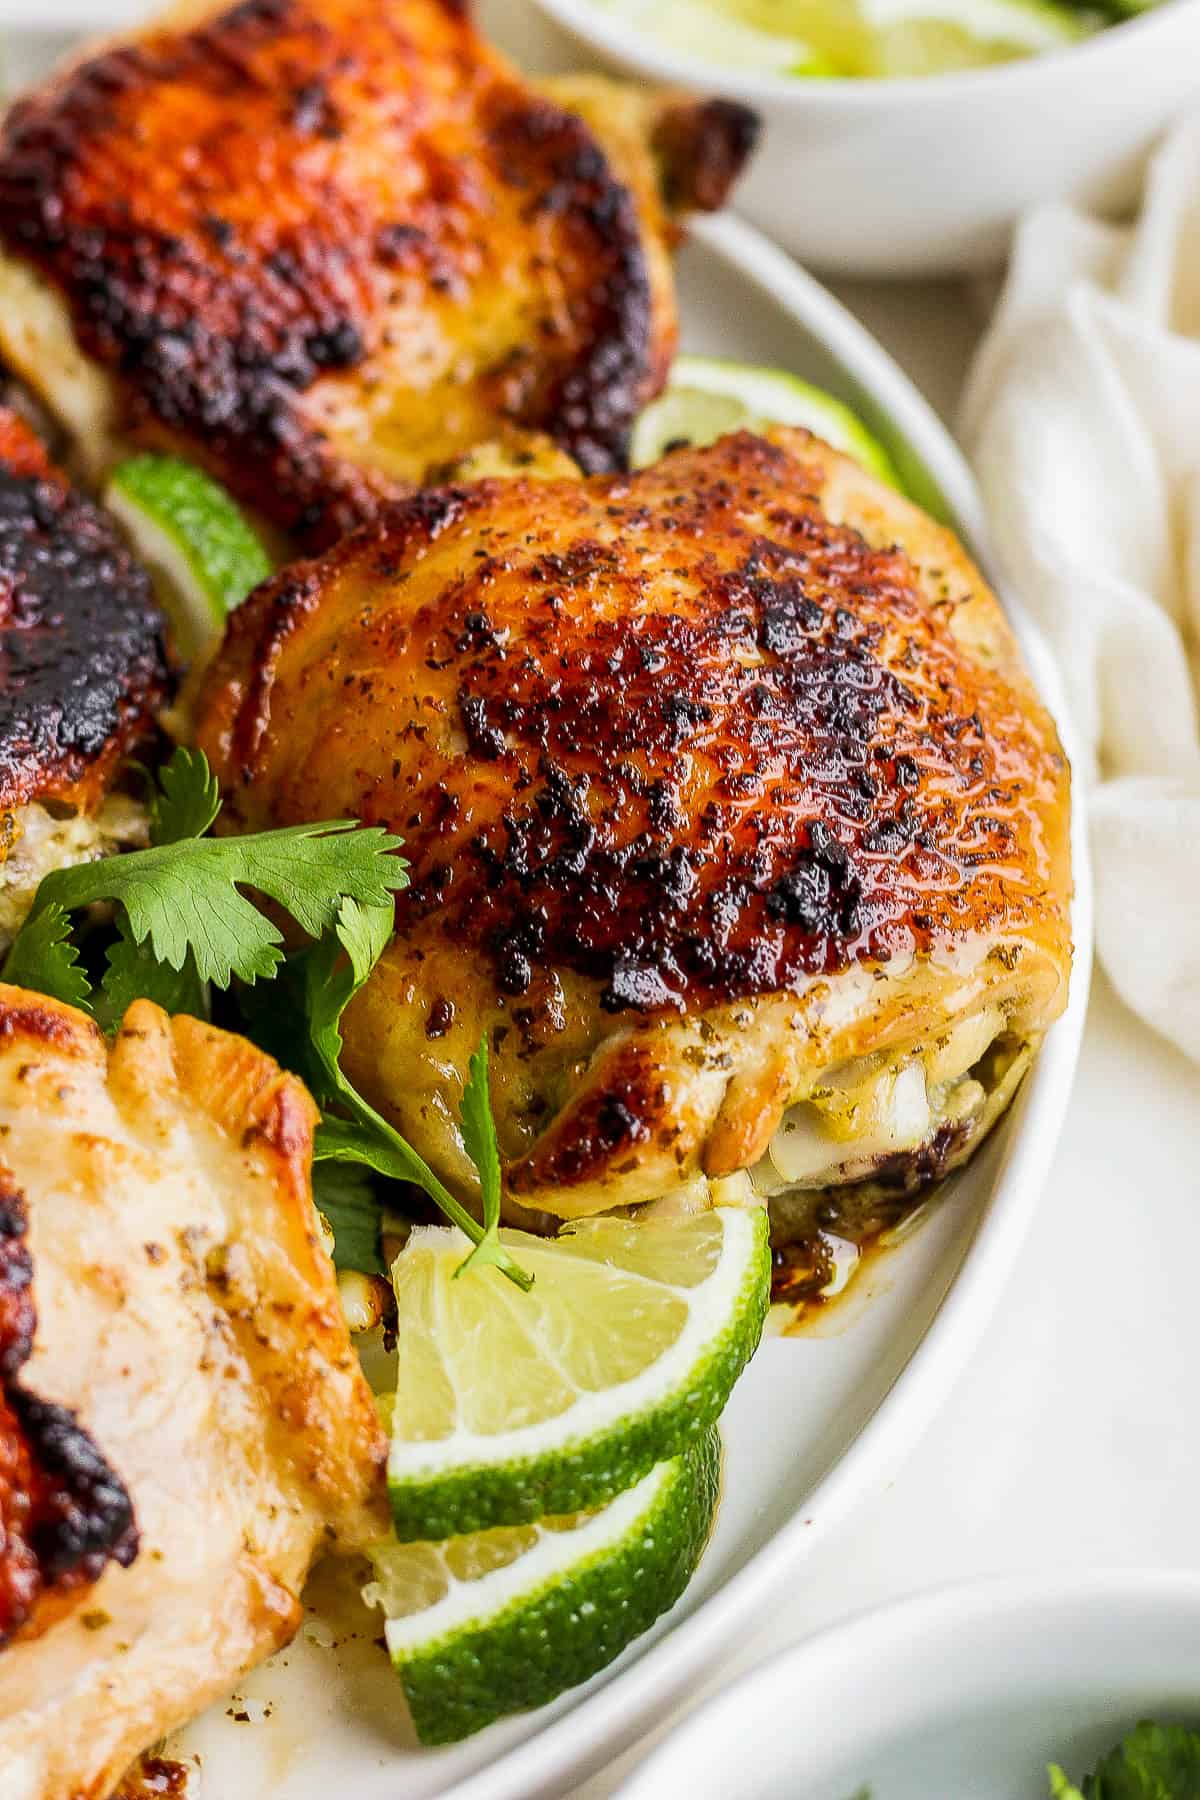 Juicy and tender cilantro lime chicken with crispy golden brown skin ready to be served.